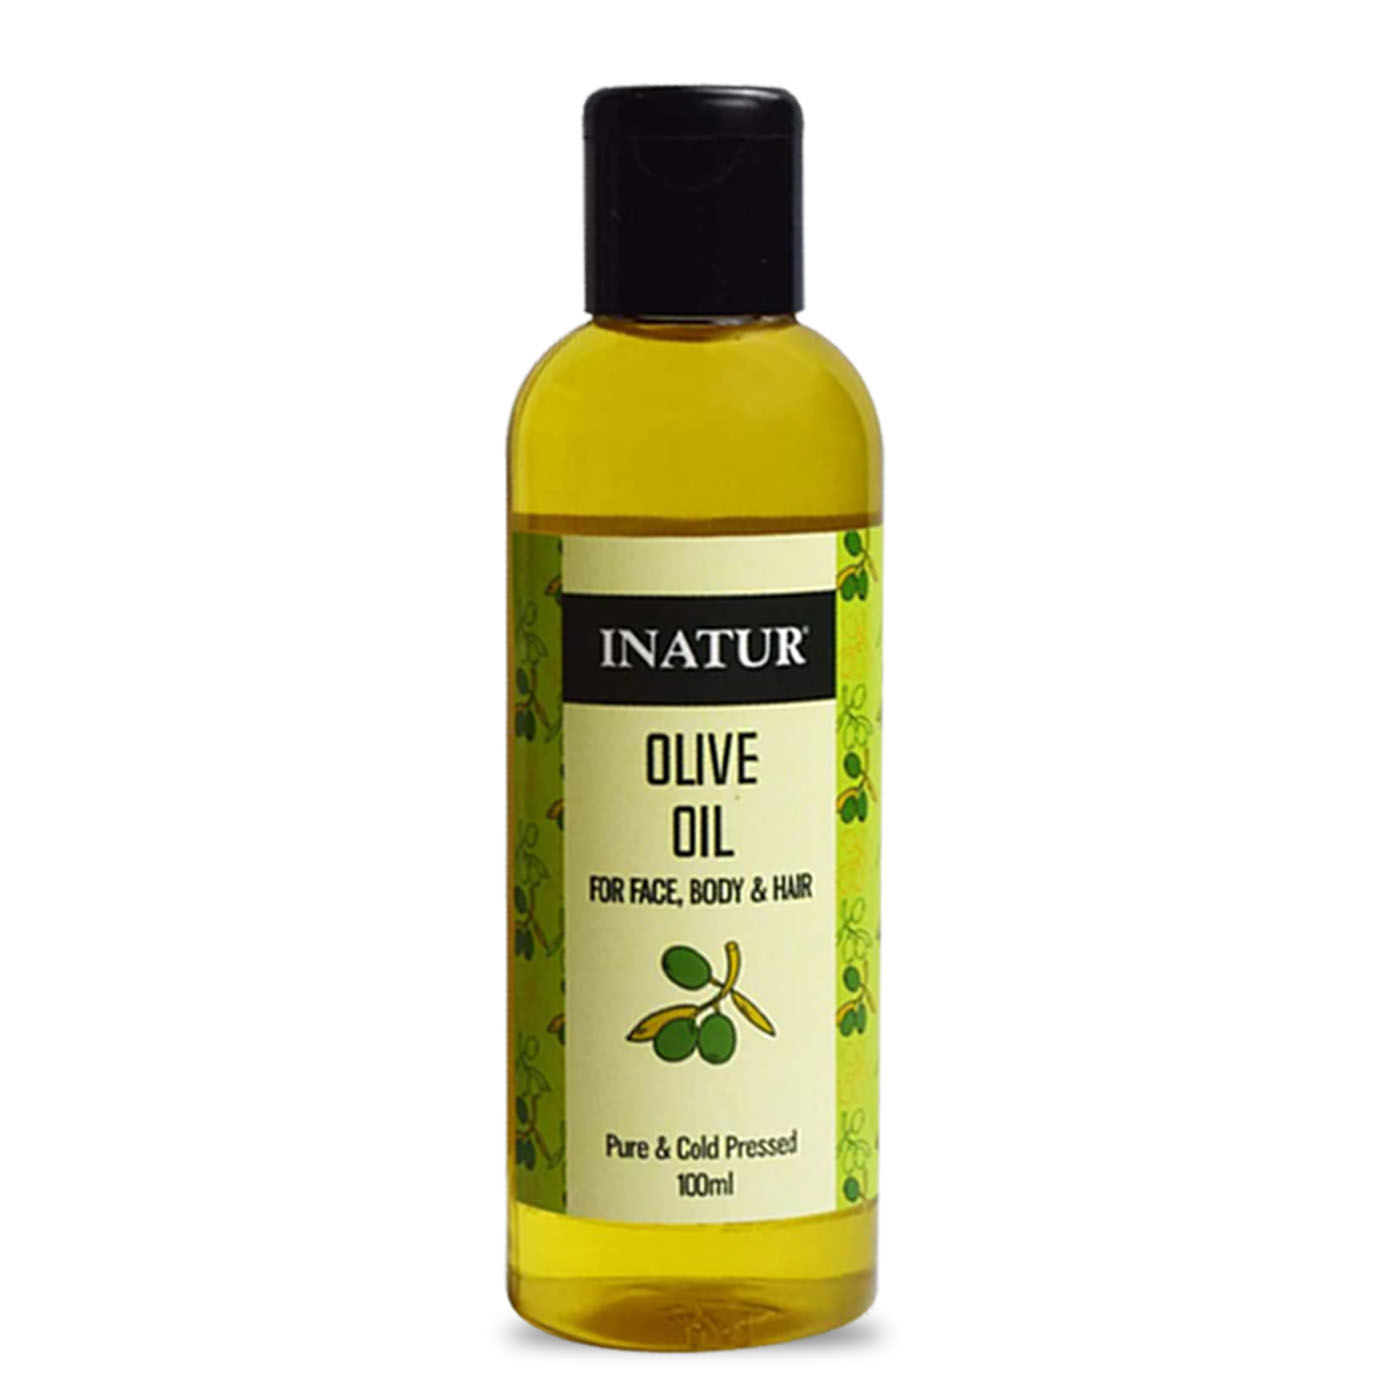 Inatur Pure and Cold Pressed Olive Oil